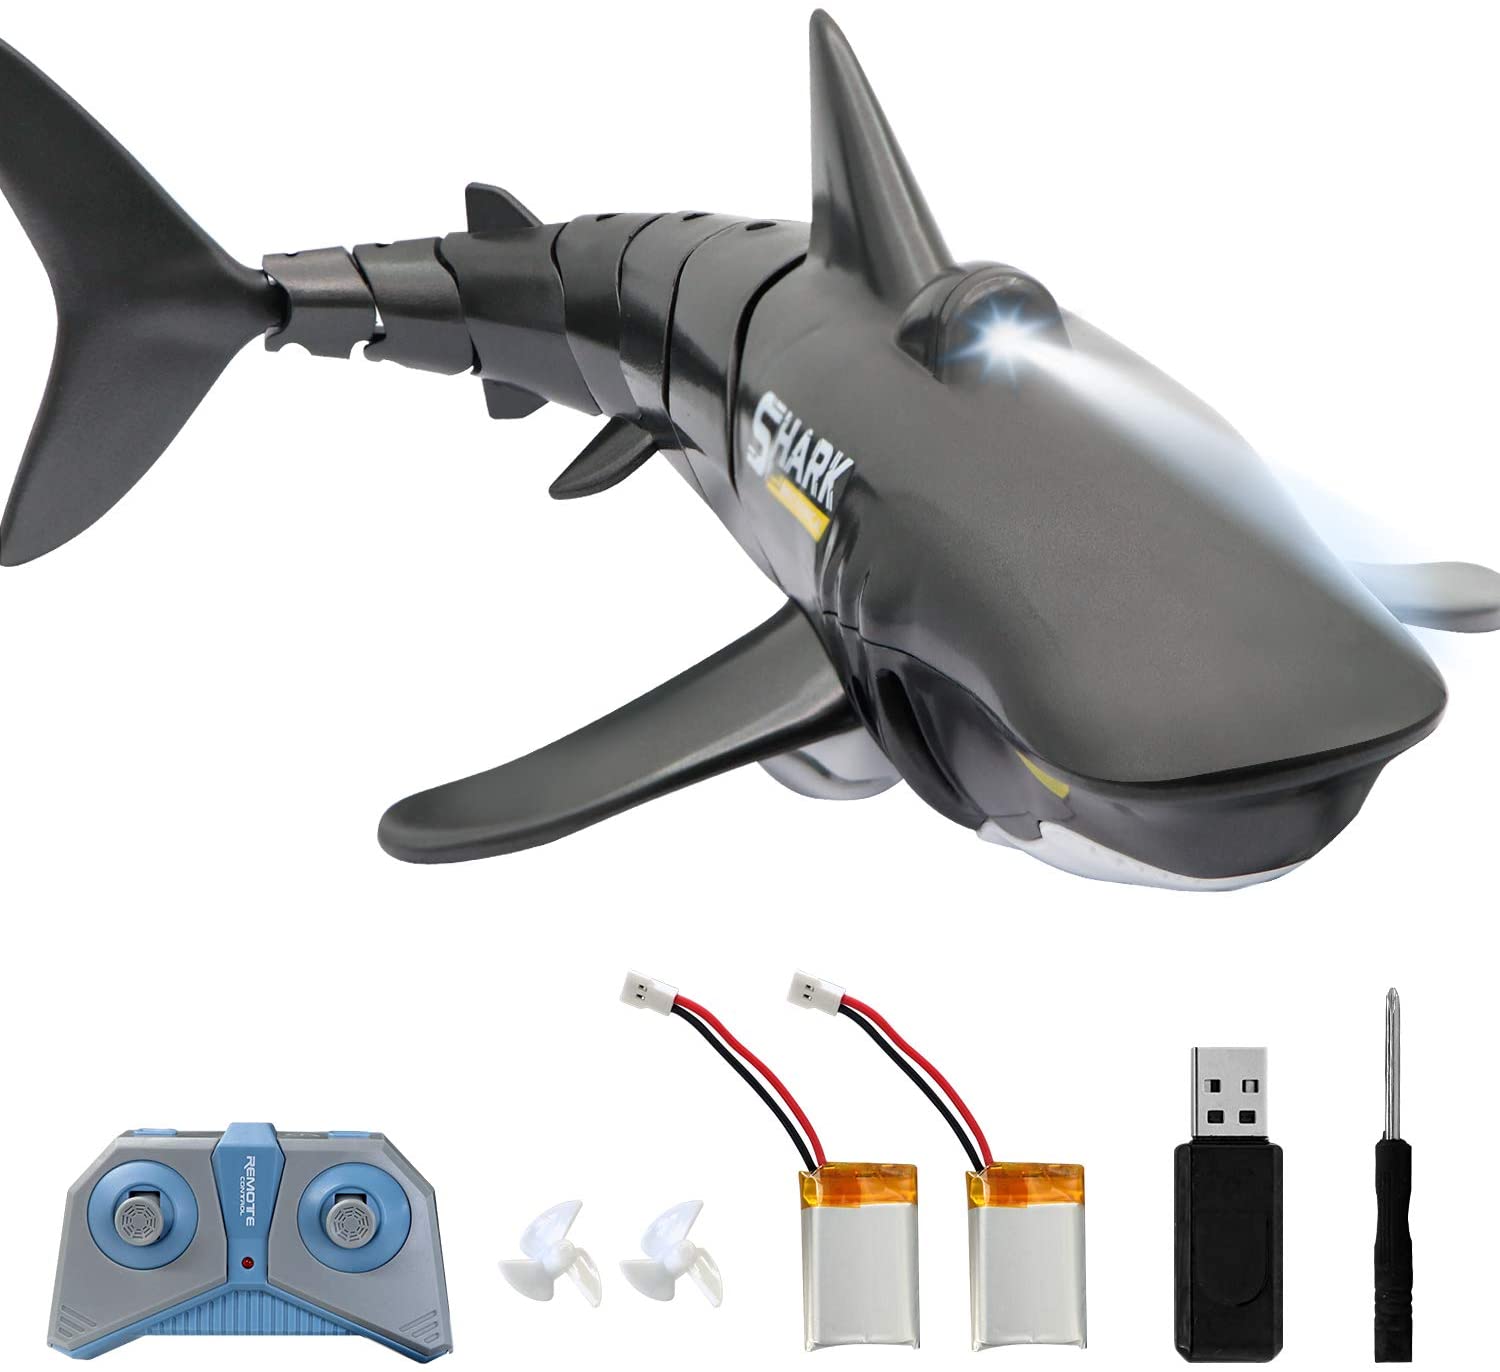  Coodoo 2.4G Remote Control Shark Toy.Interesting Shark Toys for Kids